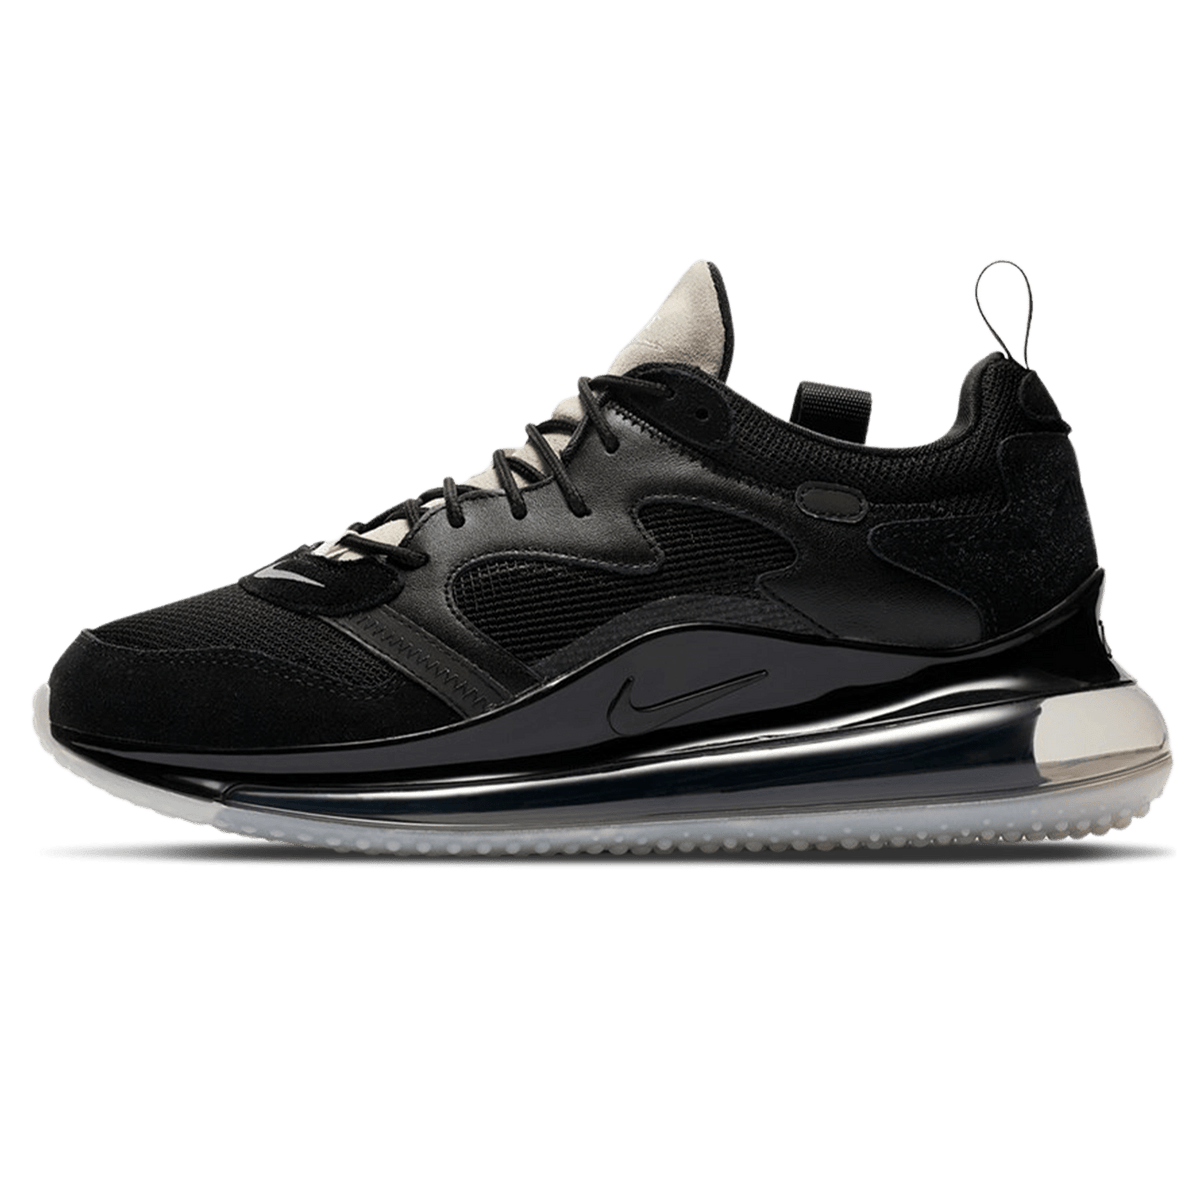 Nike Air Max 720 x Odell Beckham Jr 'Young King Of The Night' - Kick Game